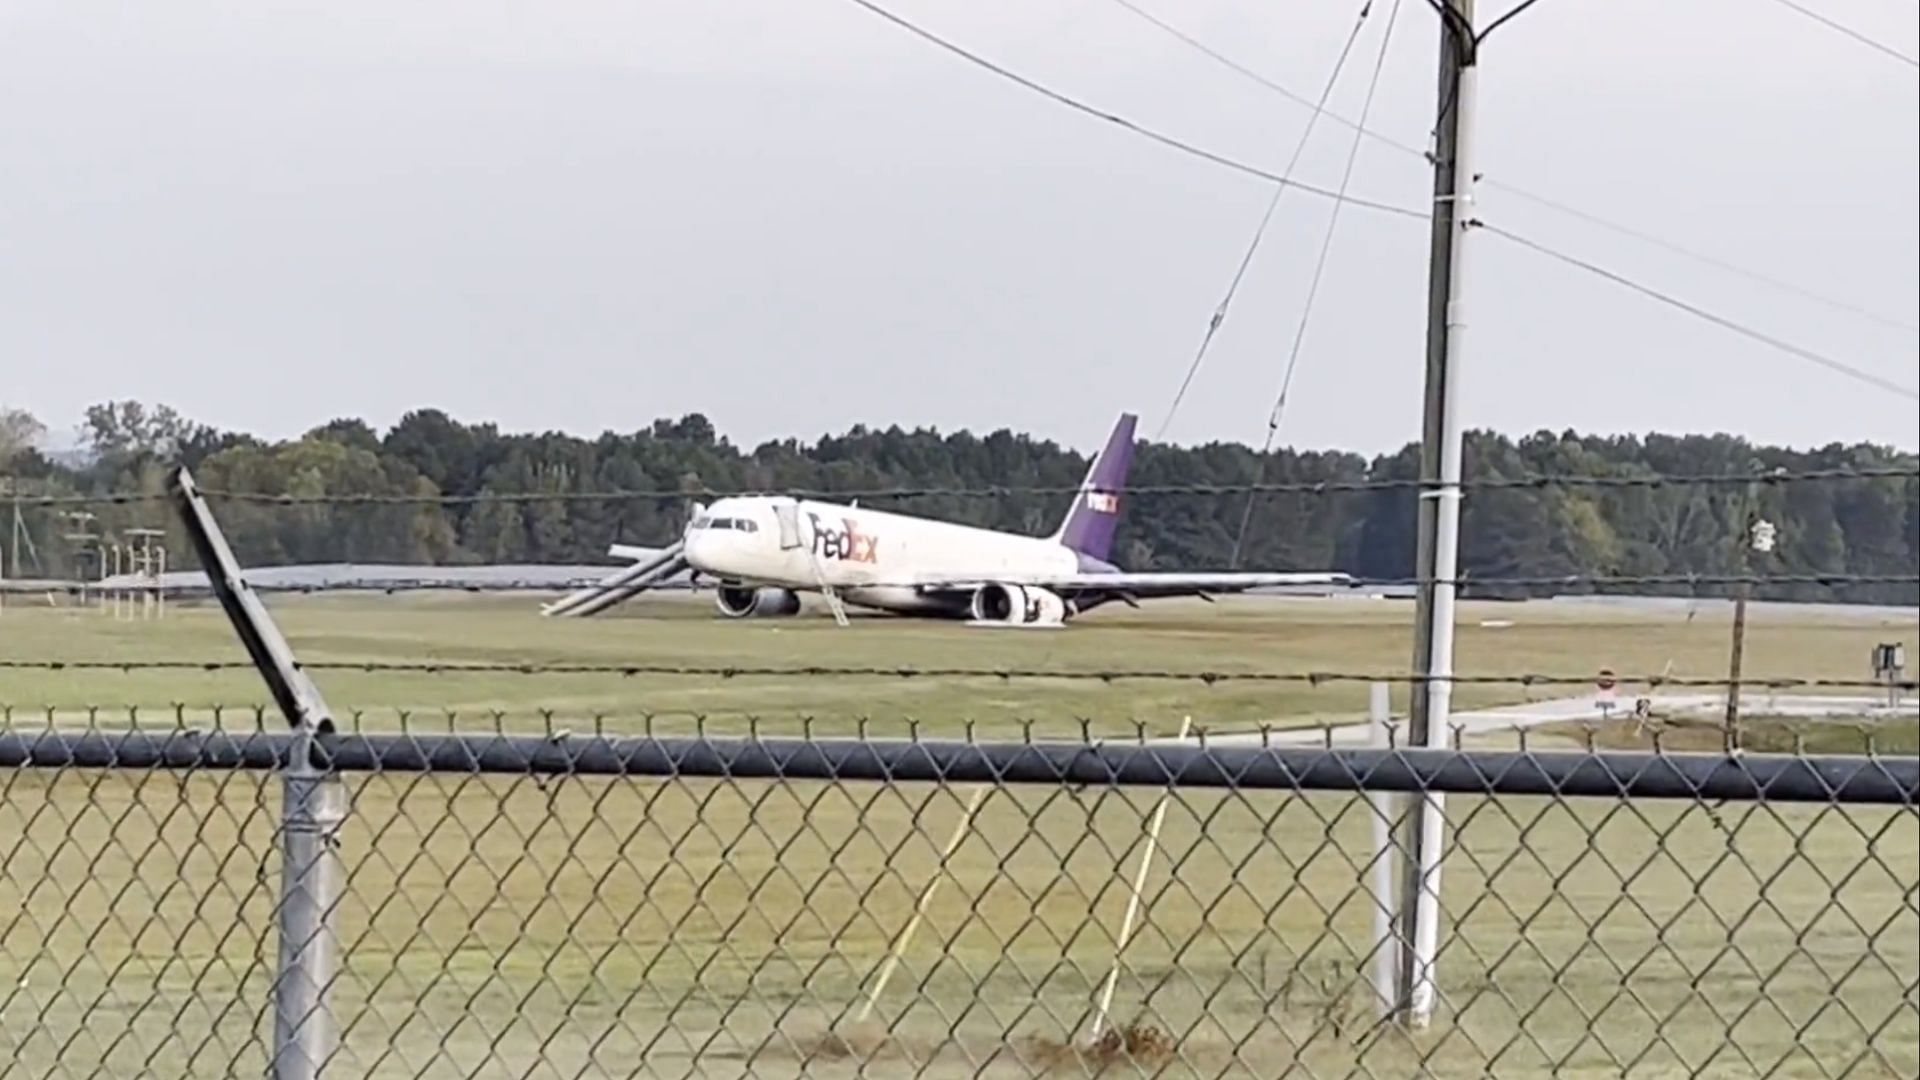 A FedEx flight crash landed in Tennessee on Wednesday (Image via X/@AviationSafety)